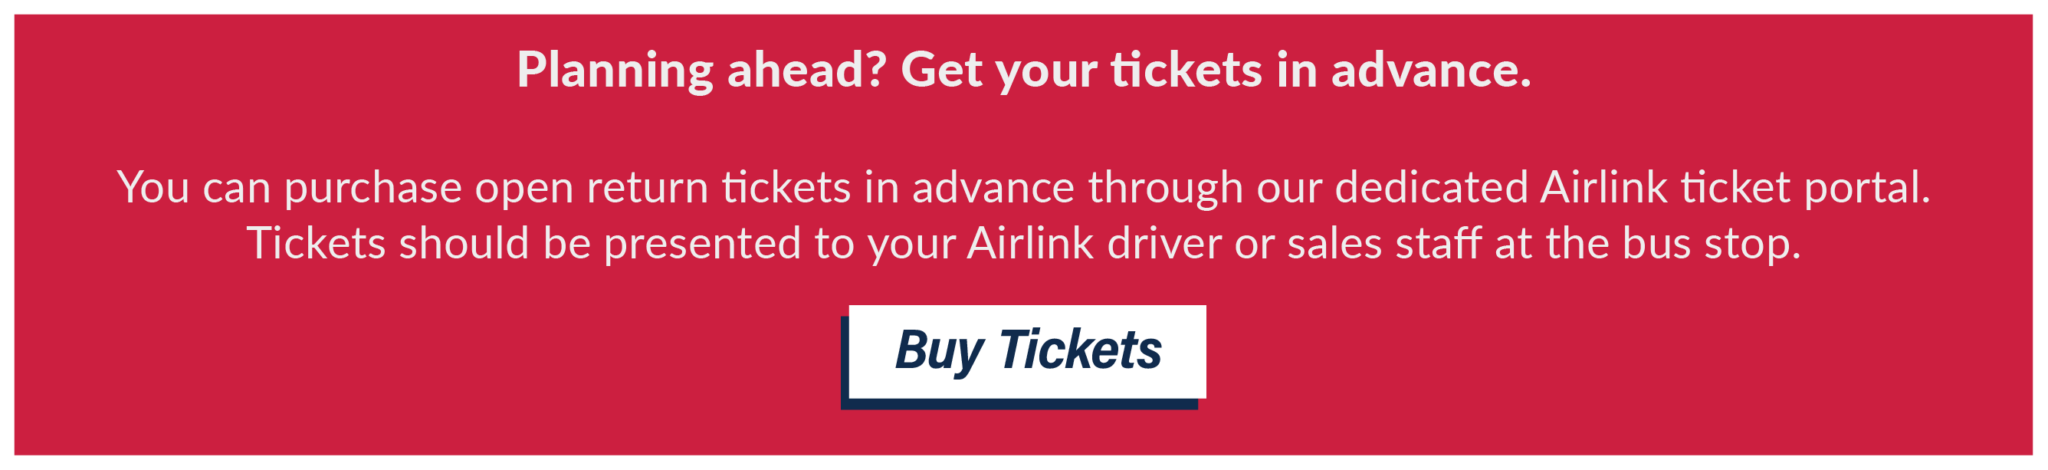 Planning ahead? Get your tickets in advance. You can purchase open return tickets in advance through our dedicated Airlink ticket portal. Tickets should be presented to your Airlink driver or sales staff at the bus stop. Buy Tickets.